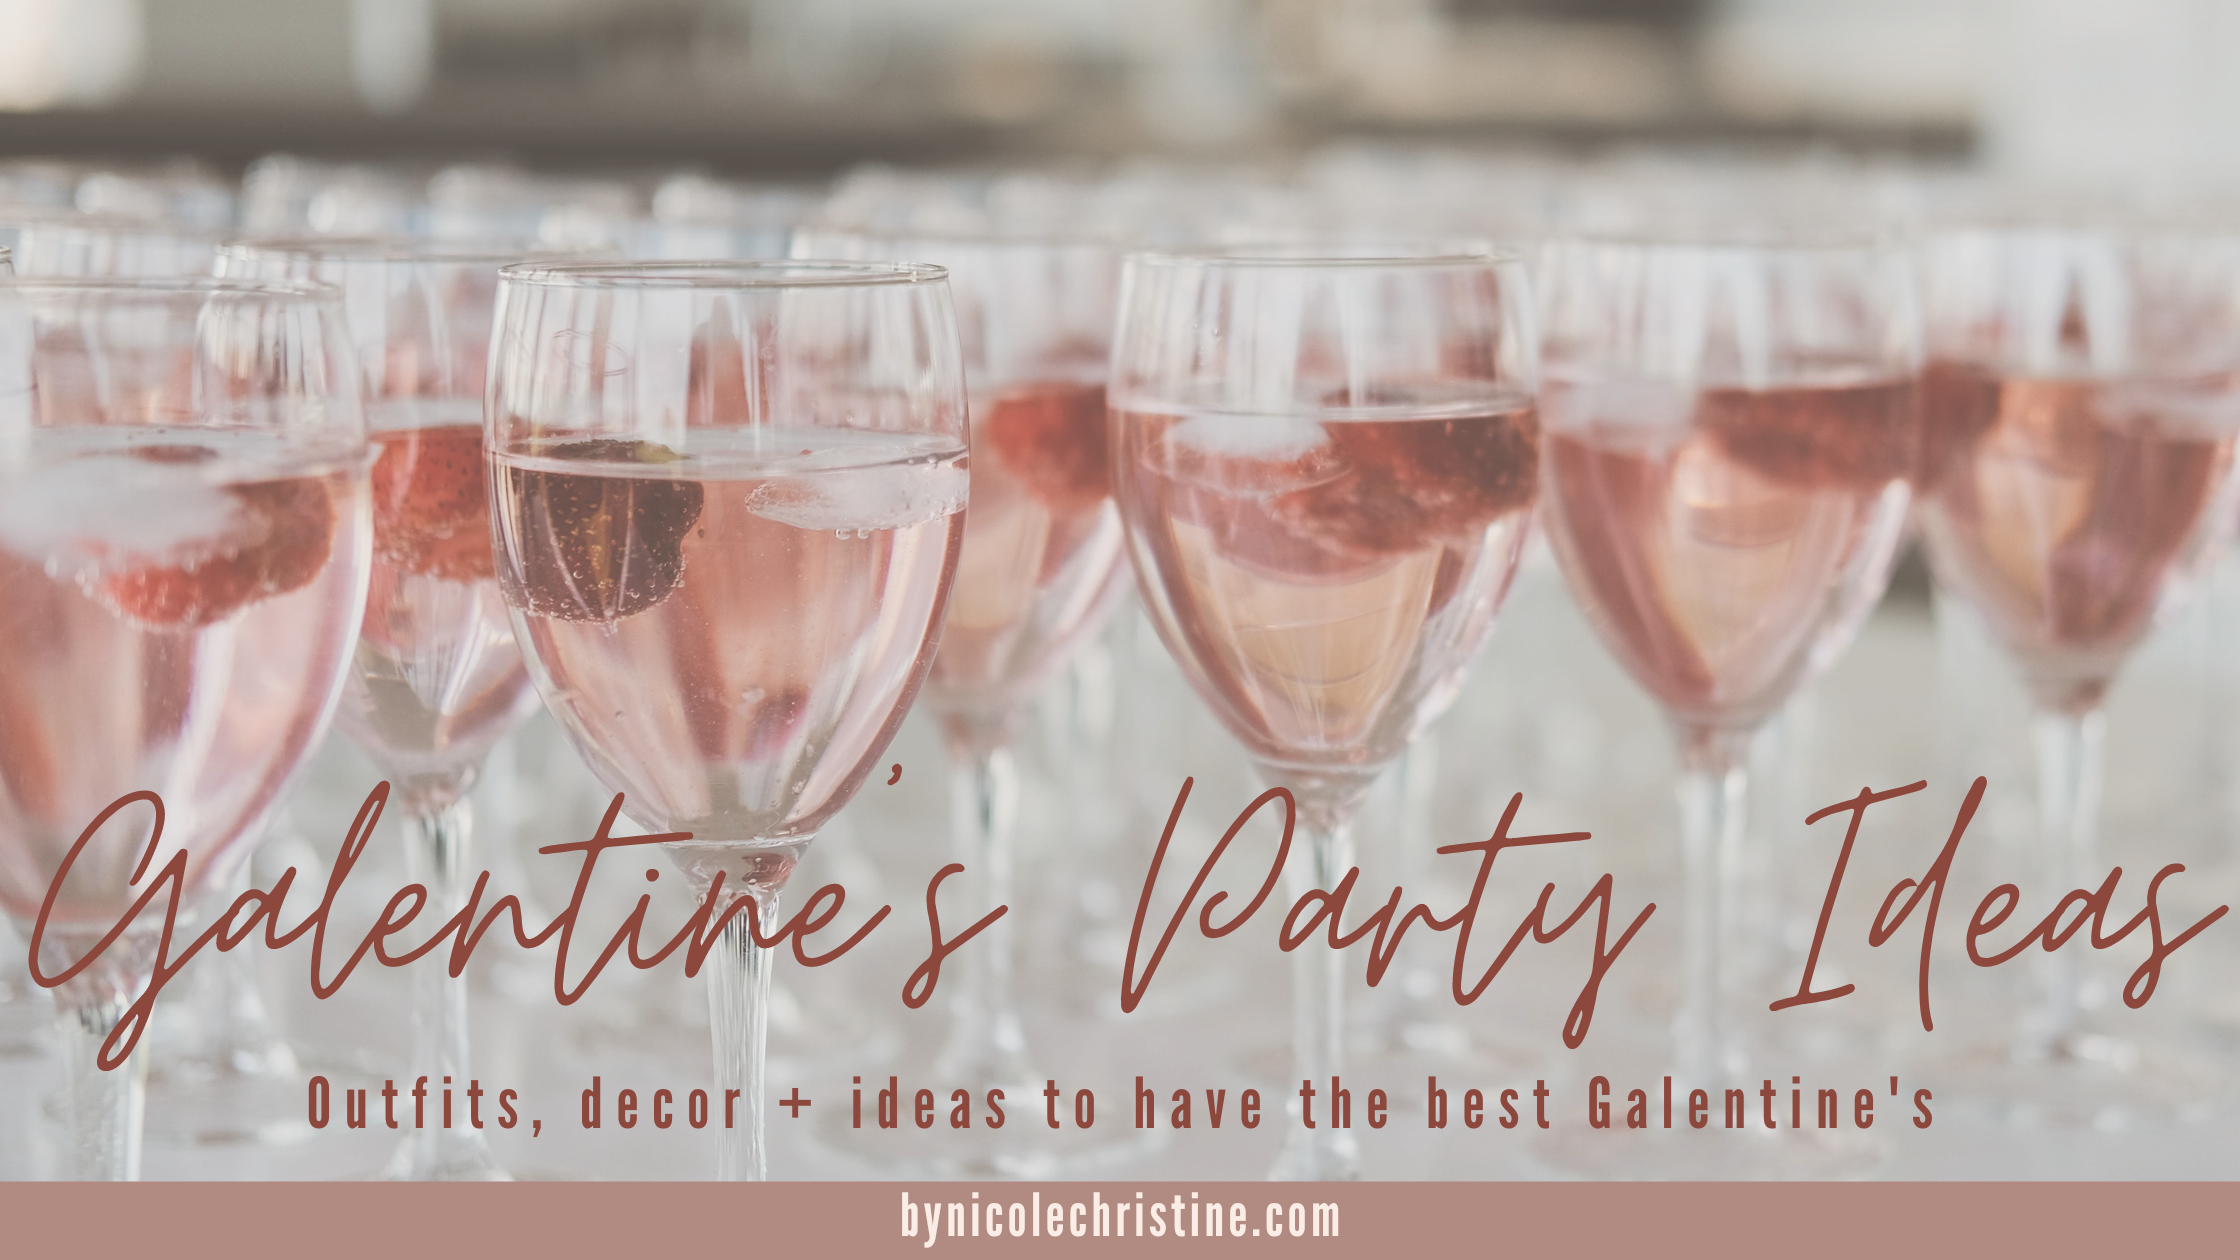 Galentine's Party Ideas